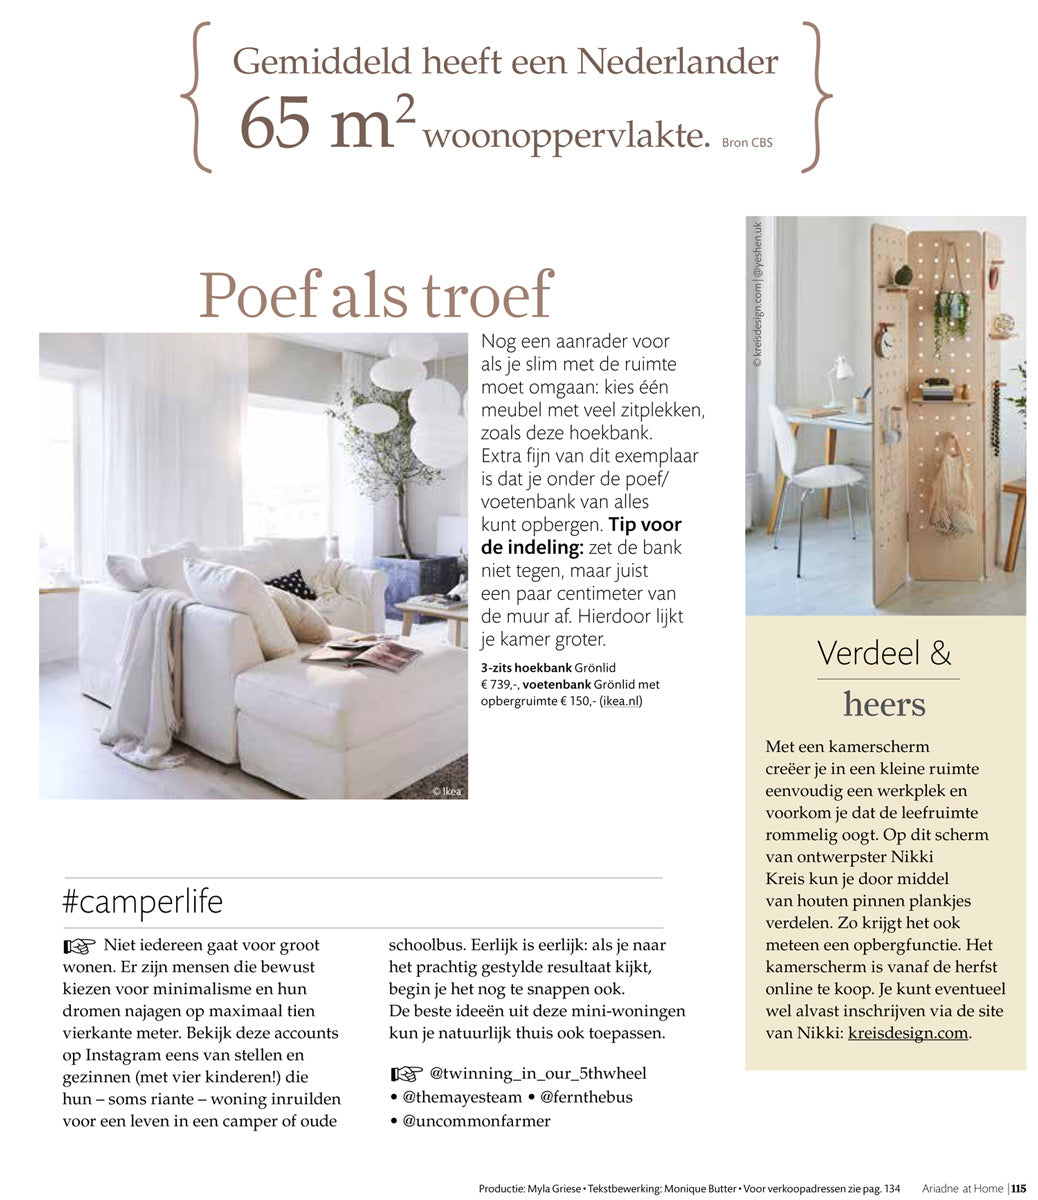 Ariadne at home dutch magazine features nikki Kreis's pegboard screen room dividers made from birch plywood